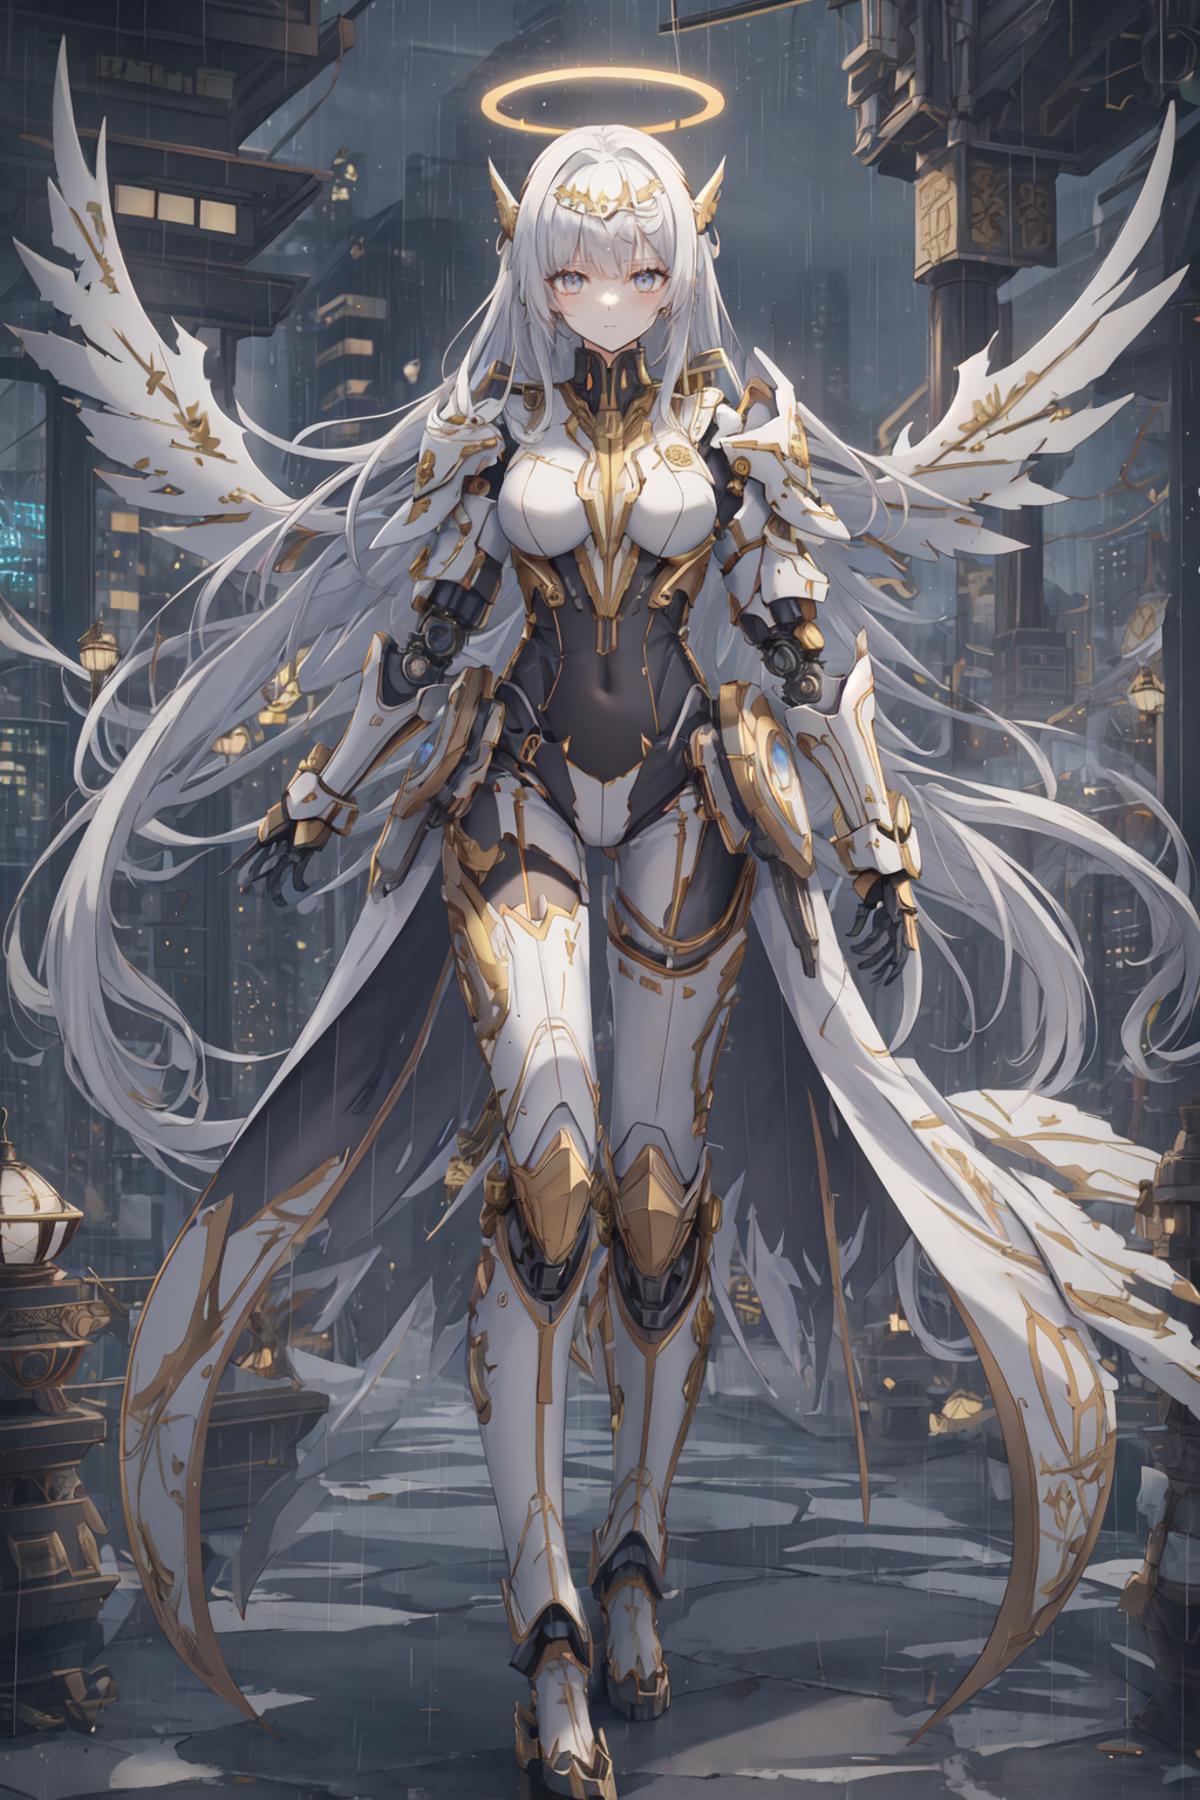 A character from a manga or anime, wearing white and gold armor and wings.